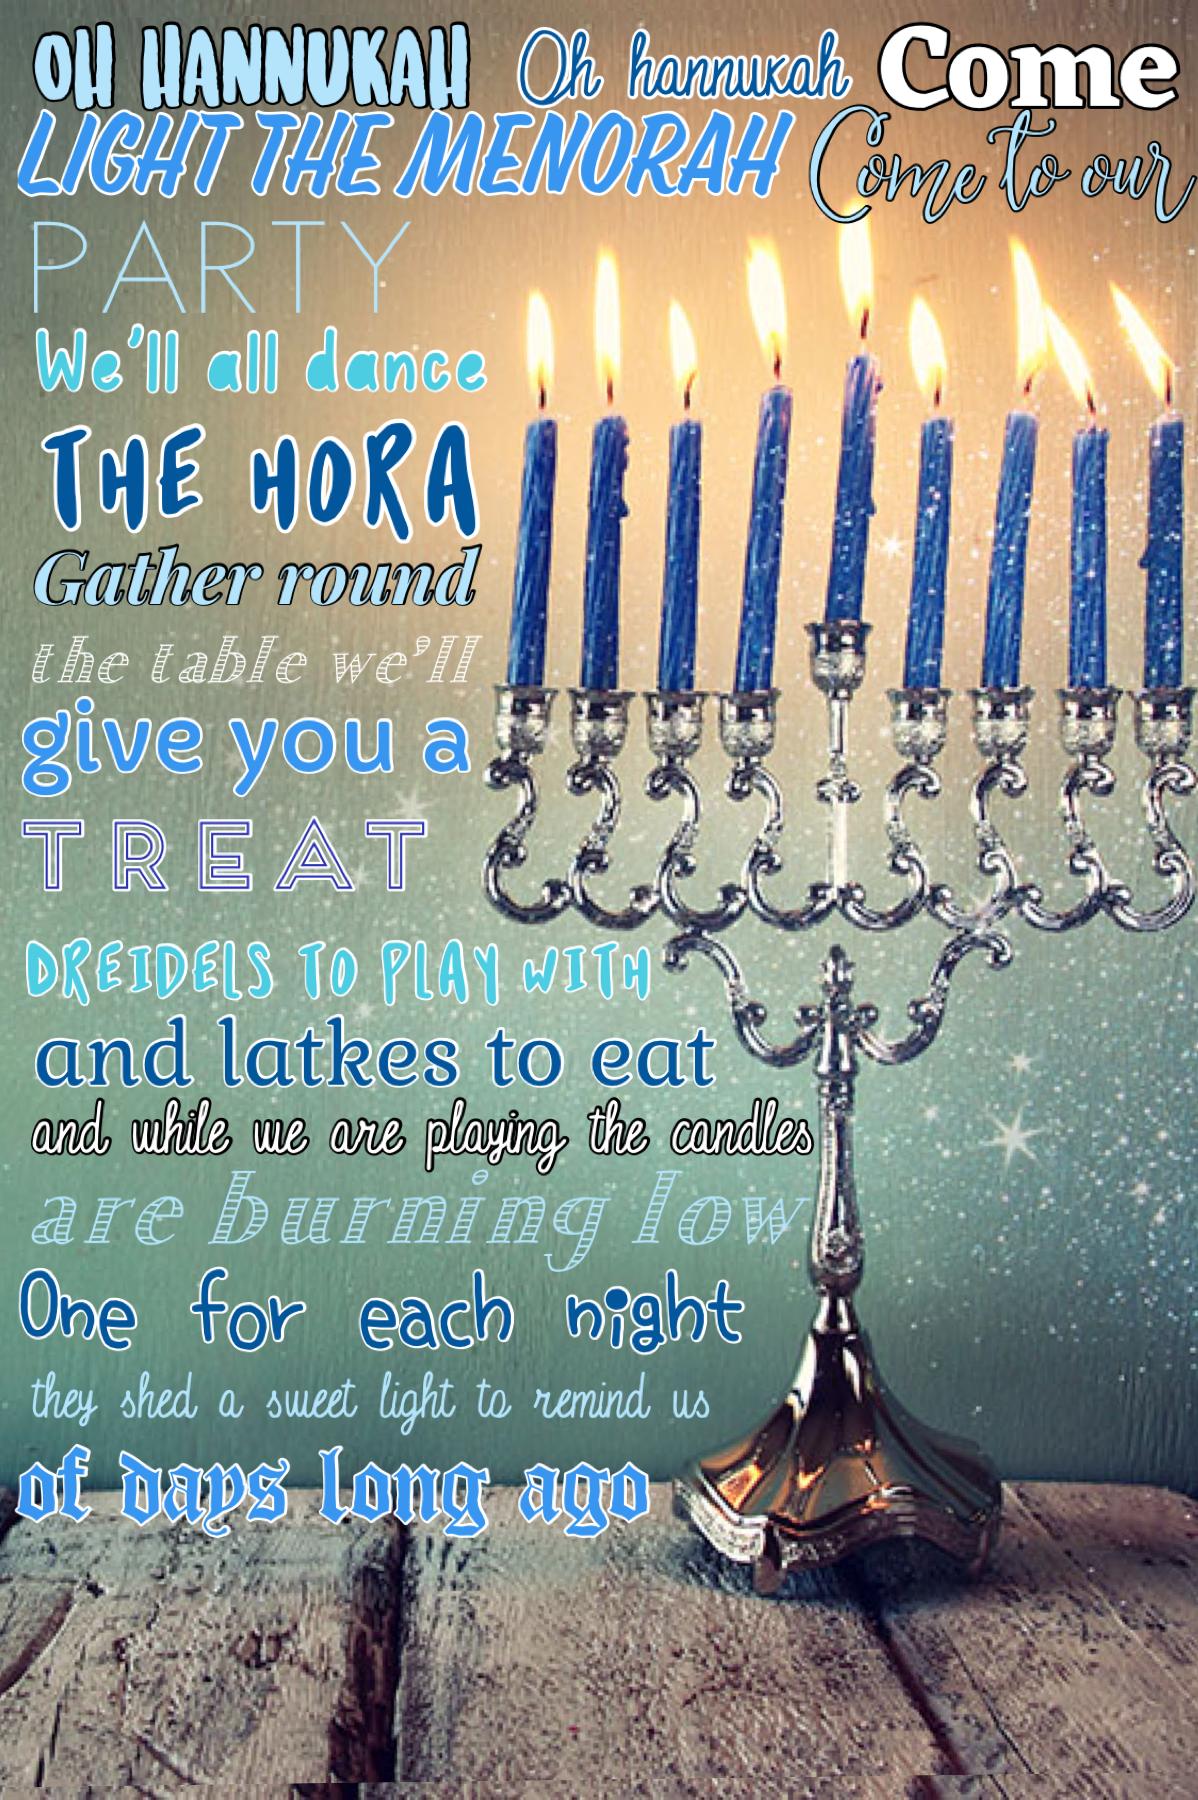 Tap!!
its almost hannukah!! time to celebrate with fellow Jewish people💙